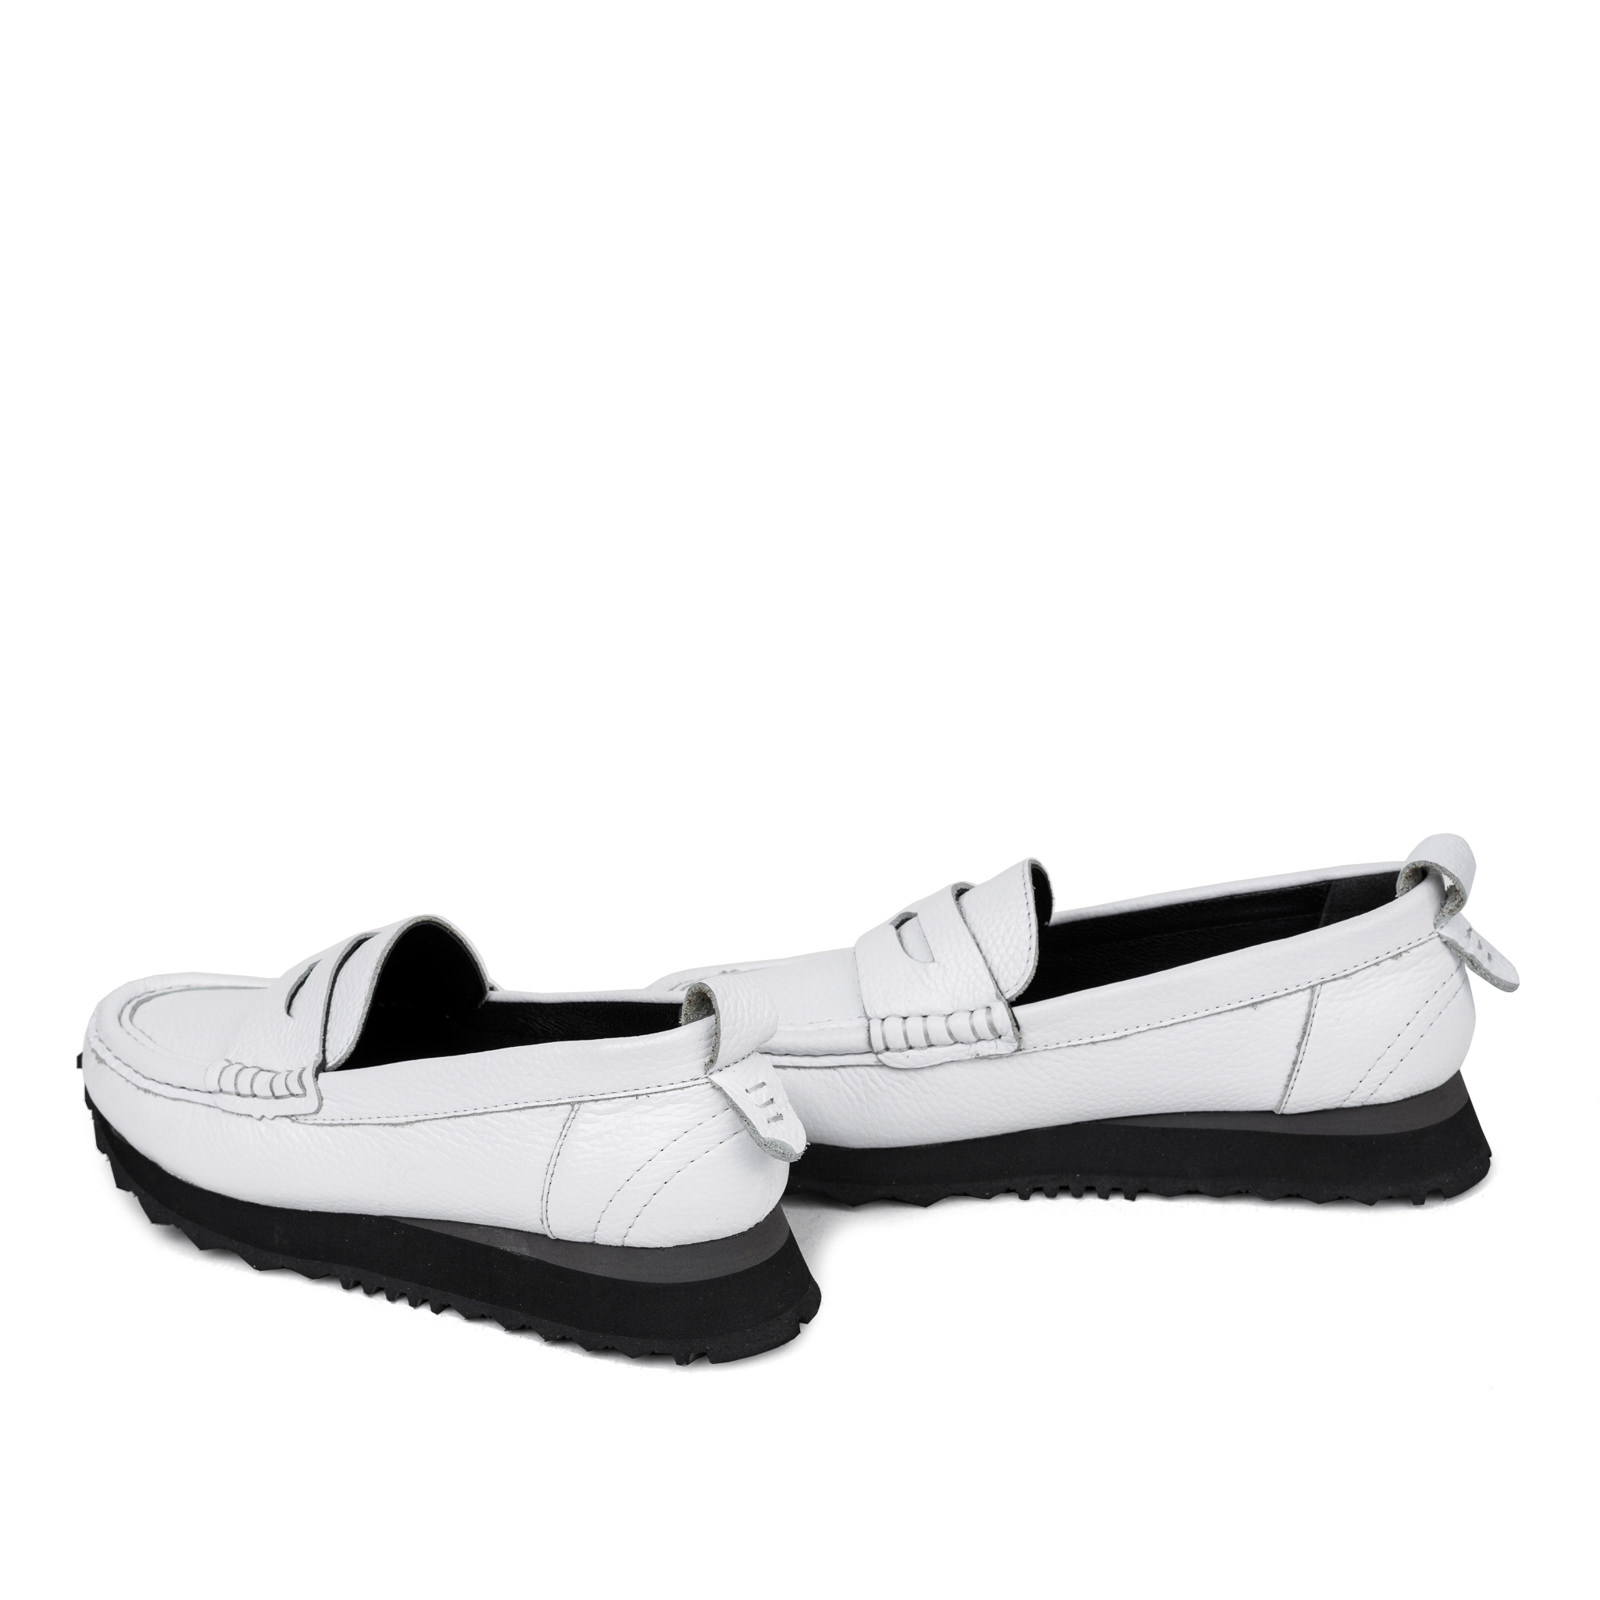 Leather shoes & flats B187 - WHITE